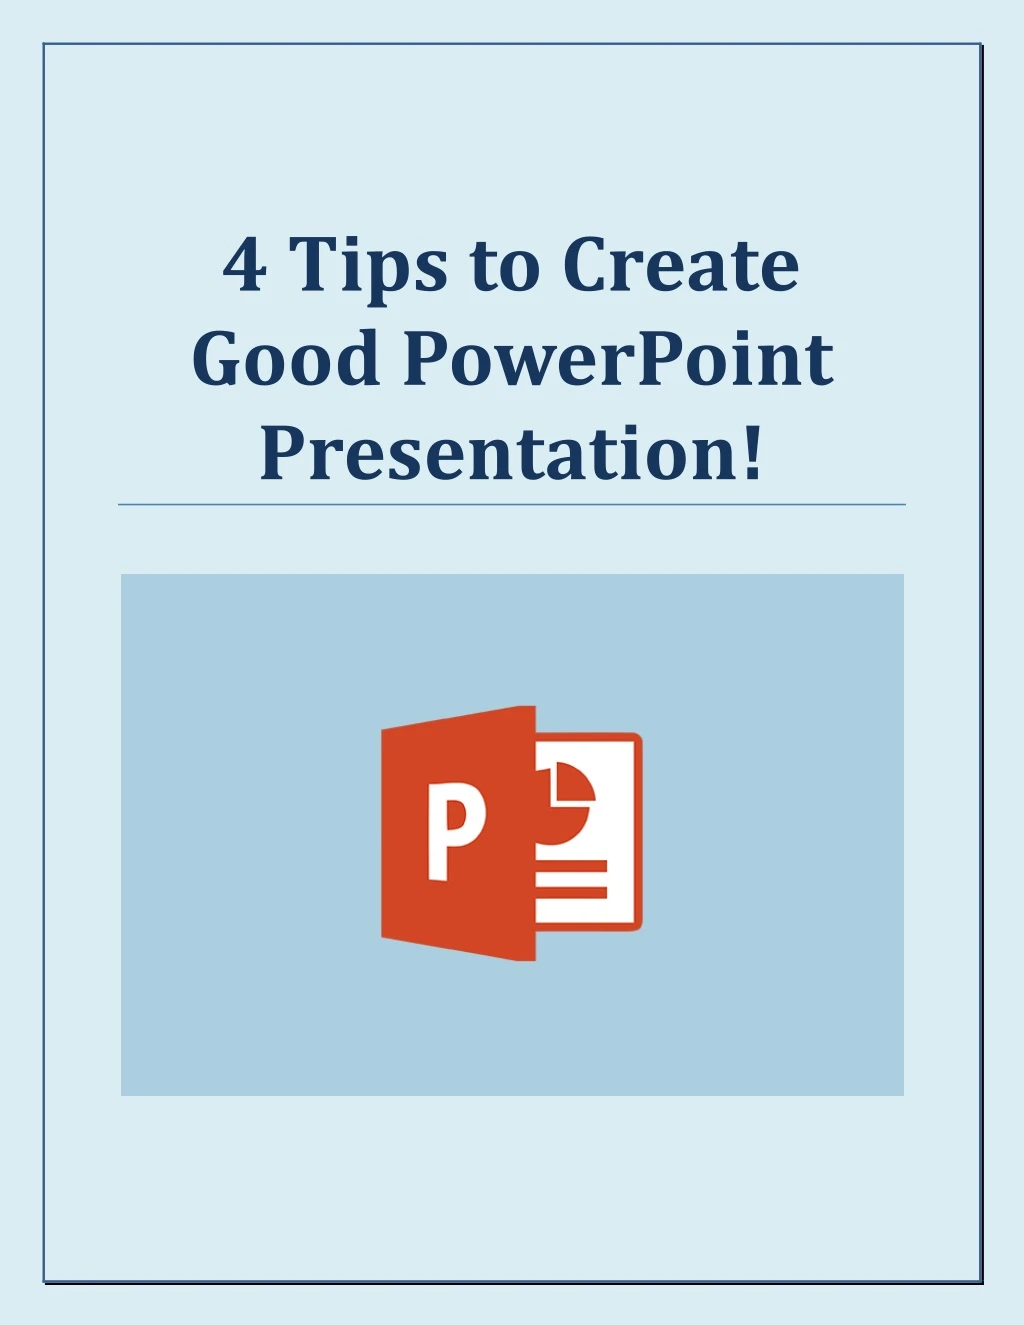 4 tips to create good powerpoint presentation